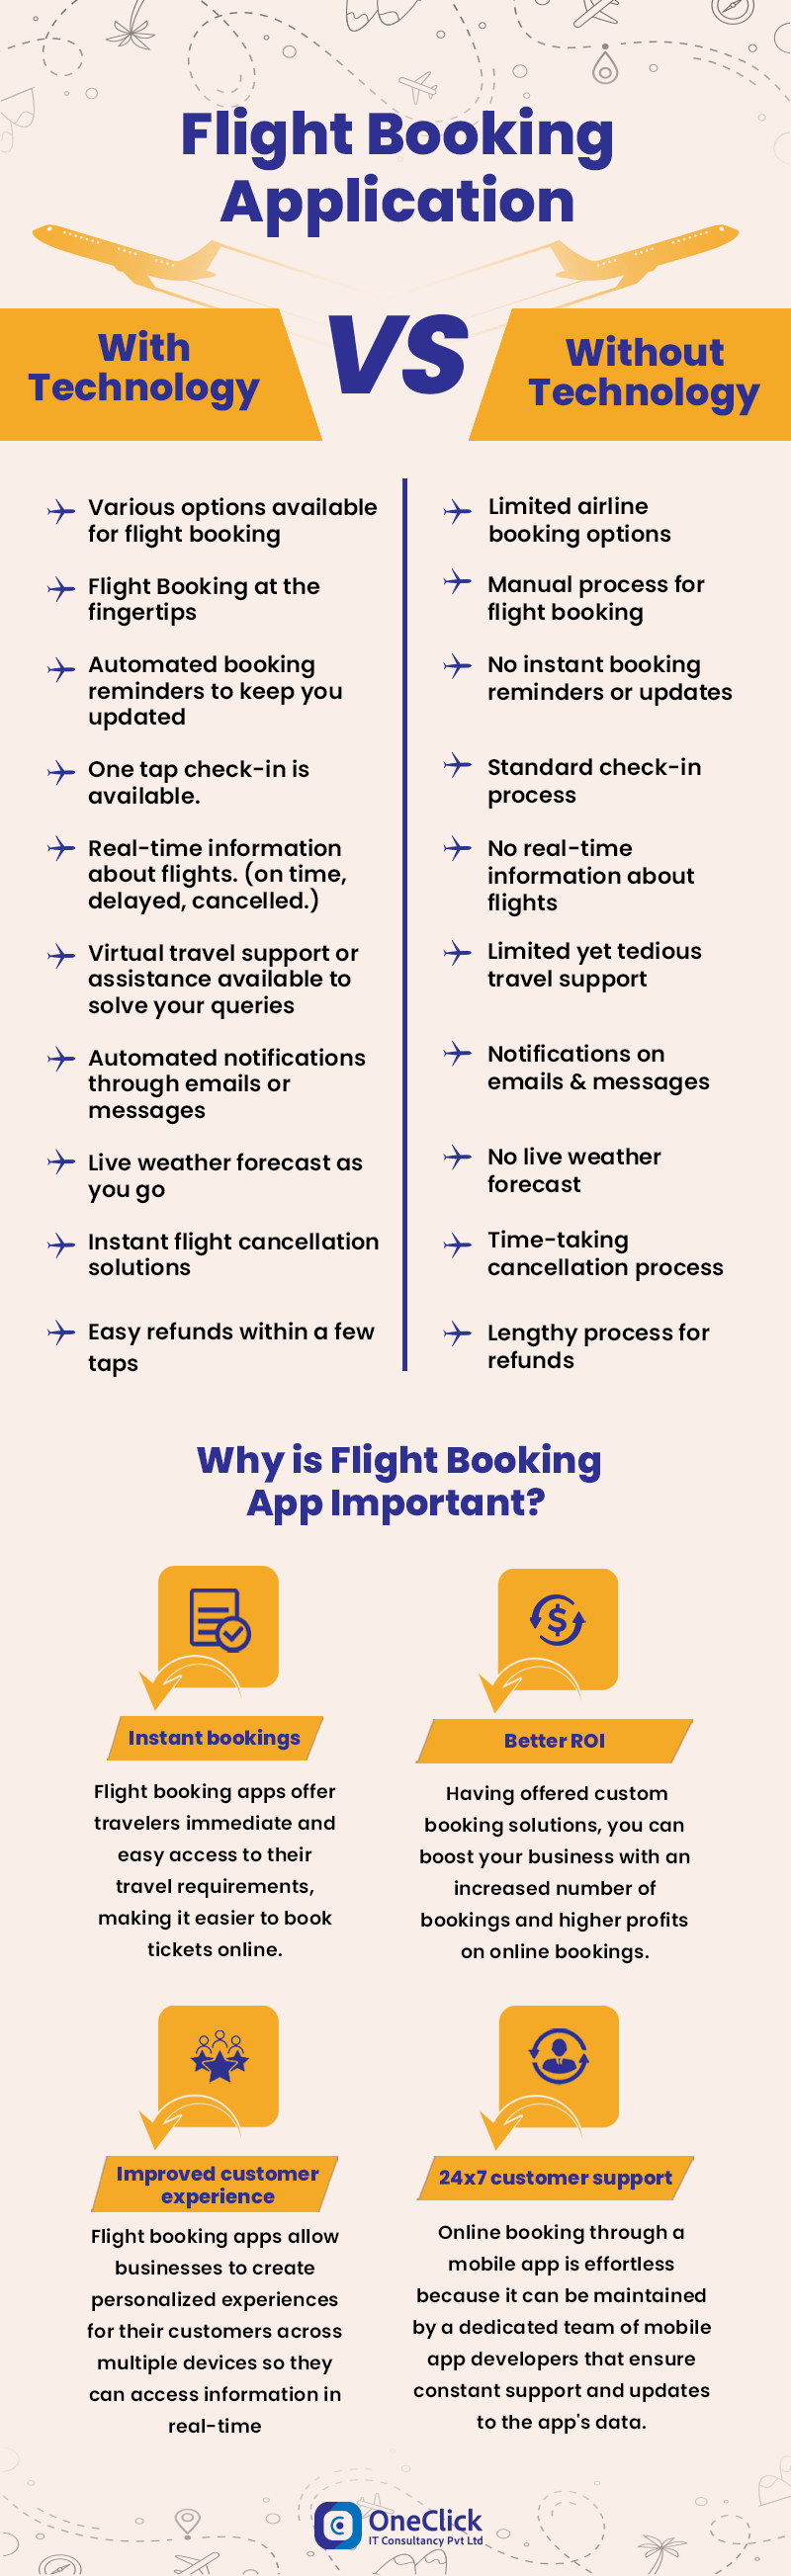 flight booking app with technology vs without technology - infographic